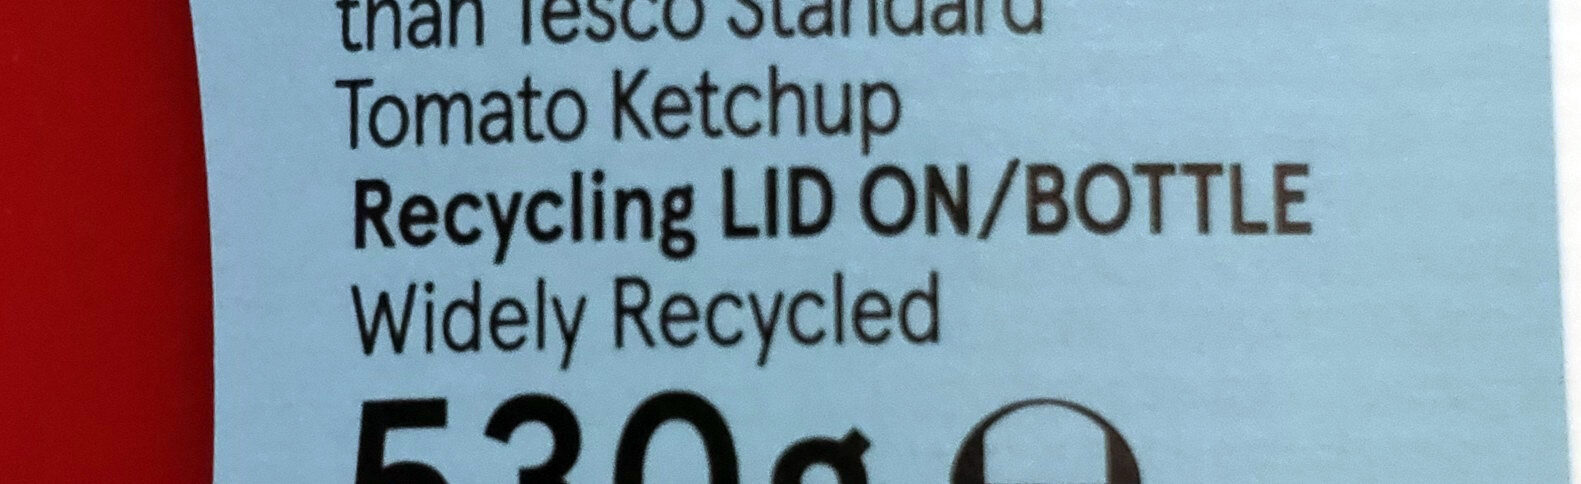 Reduced sugar & salt tomato ketchup - Recycling instructions and/or packaging information